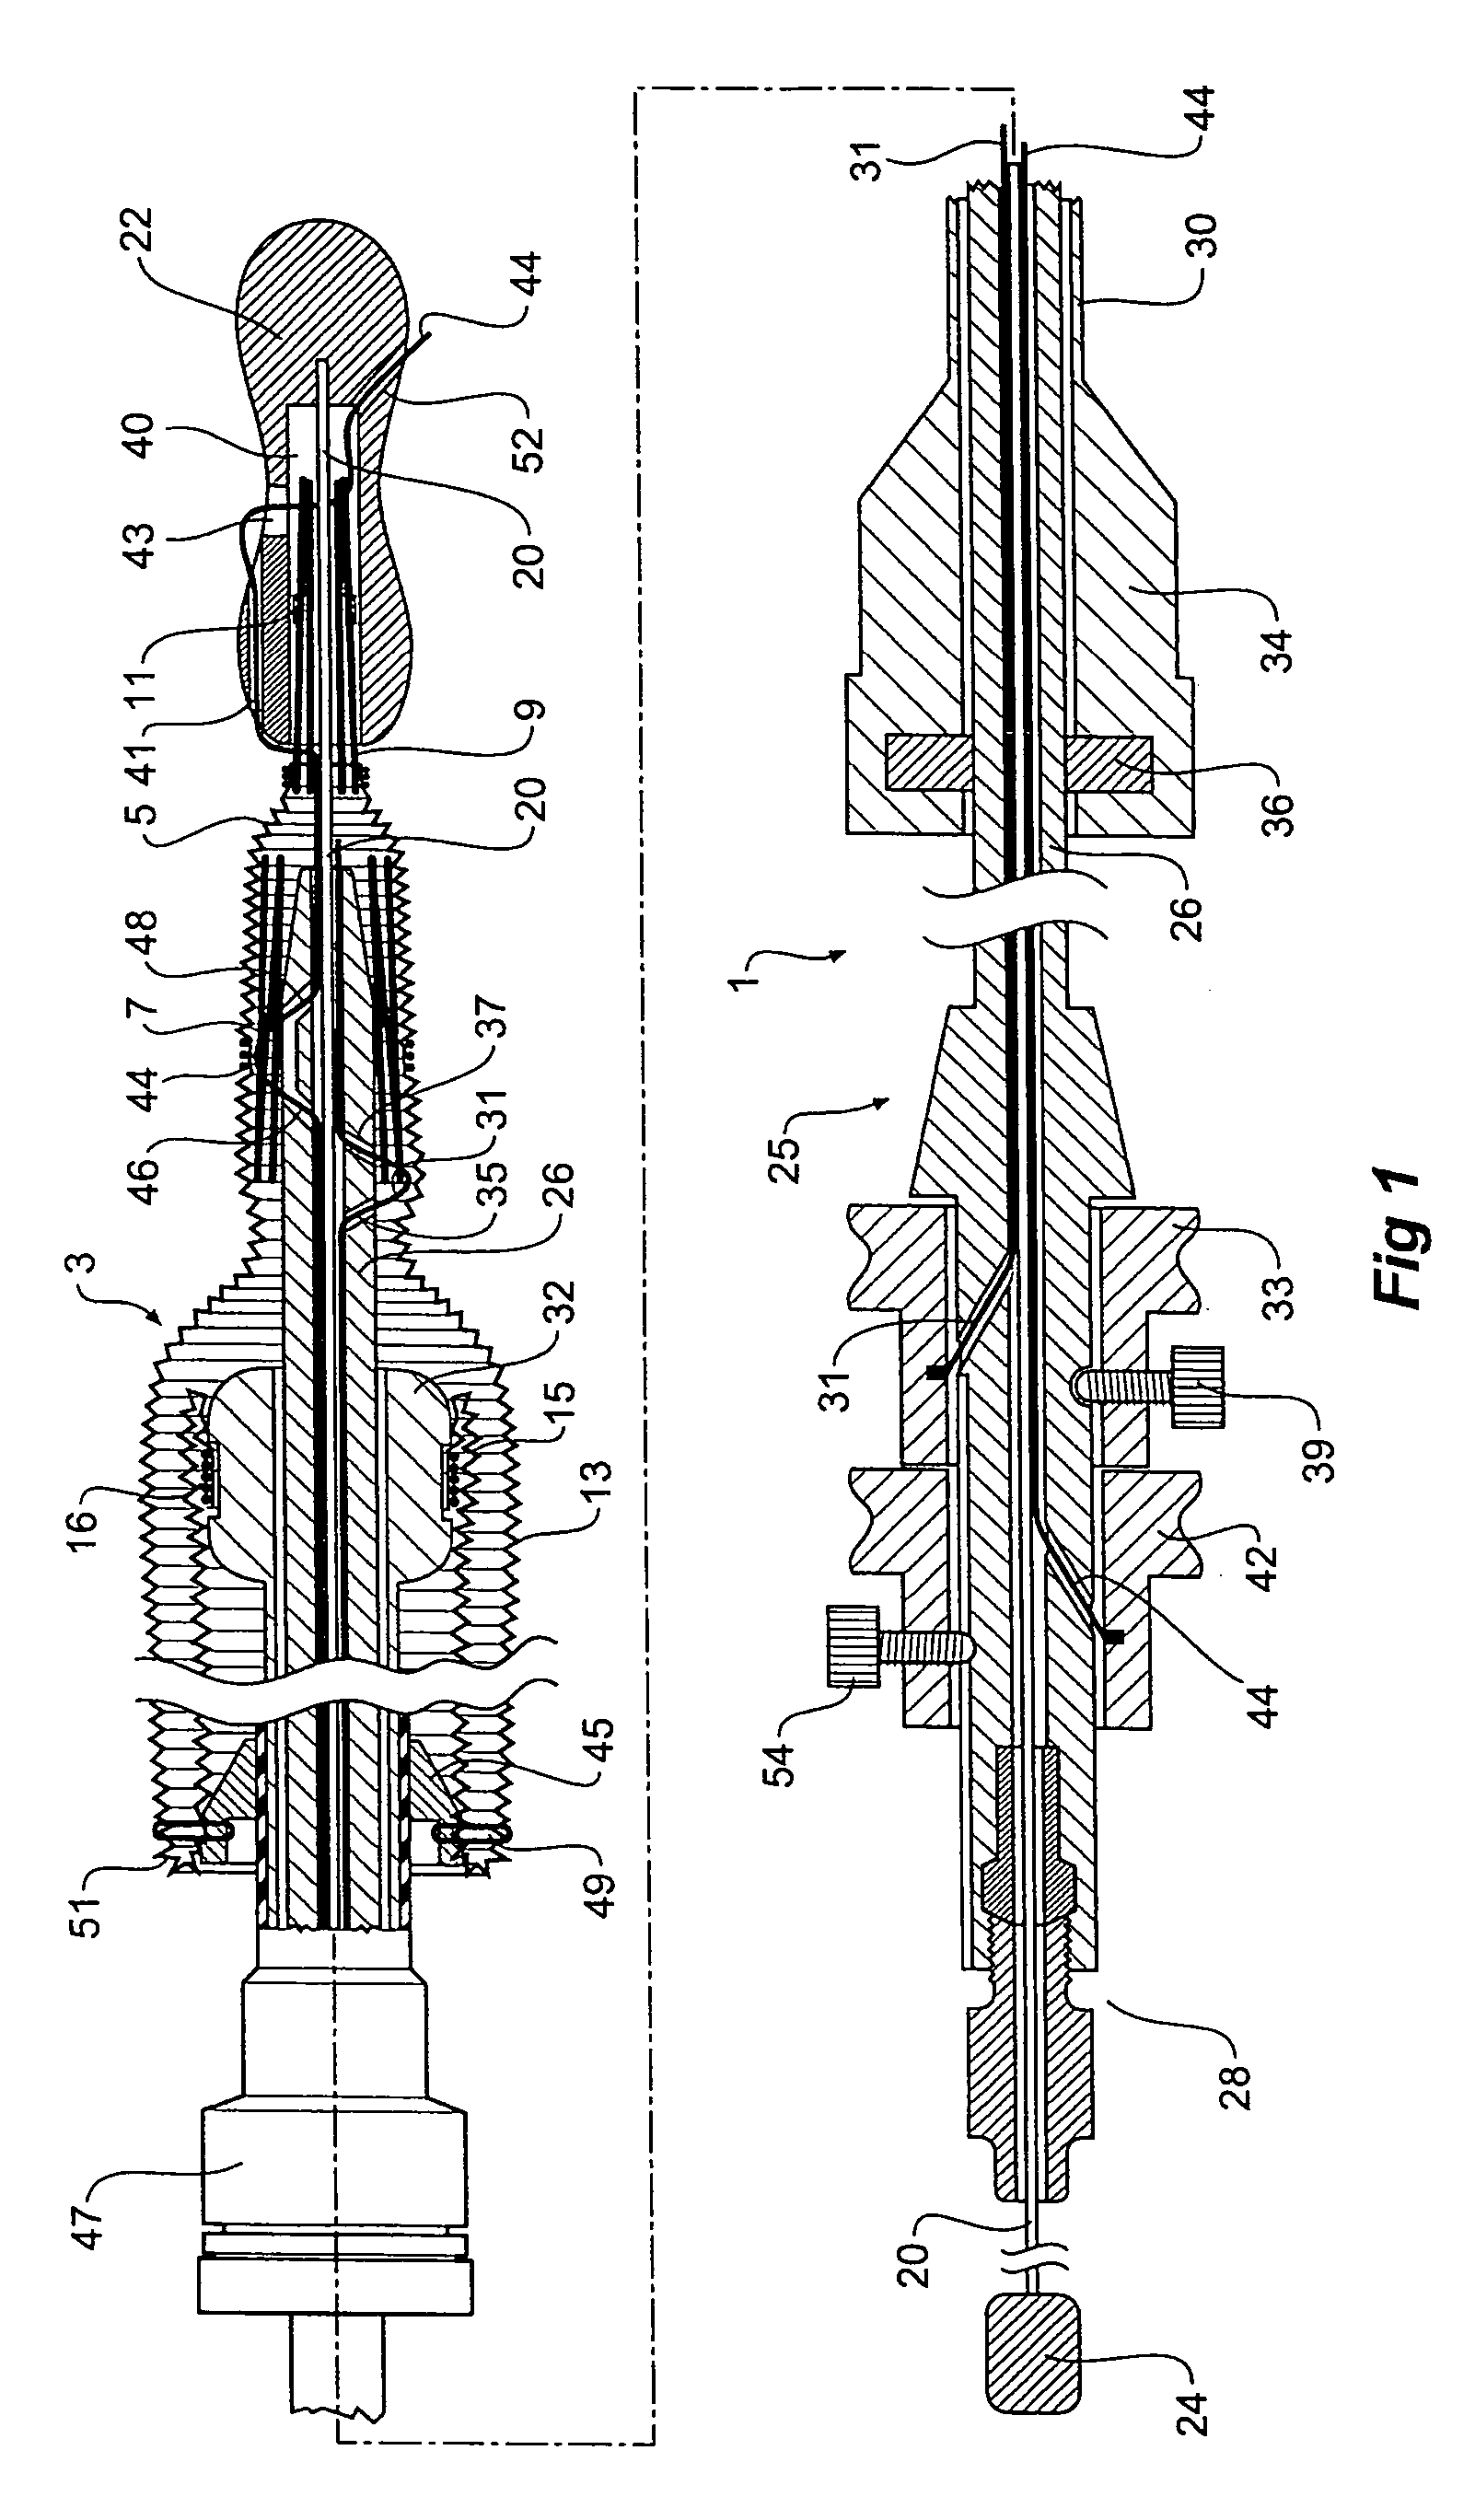 Device and method for treating thoracic aorta